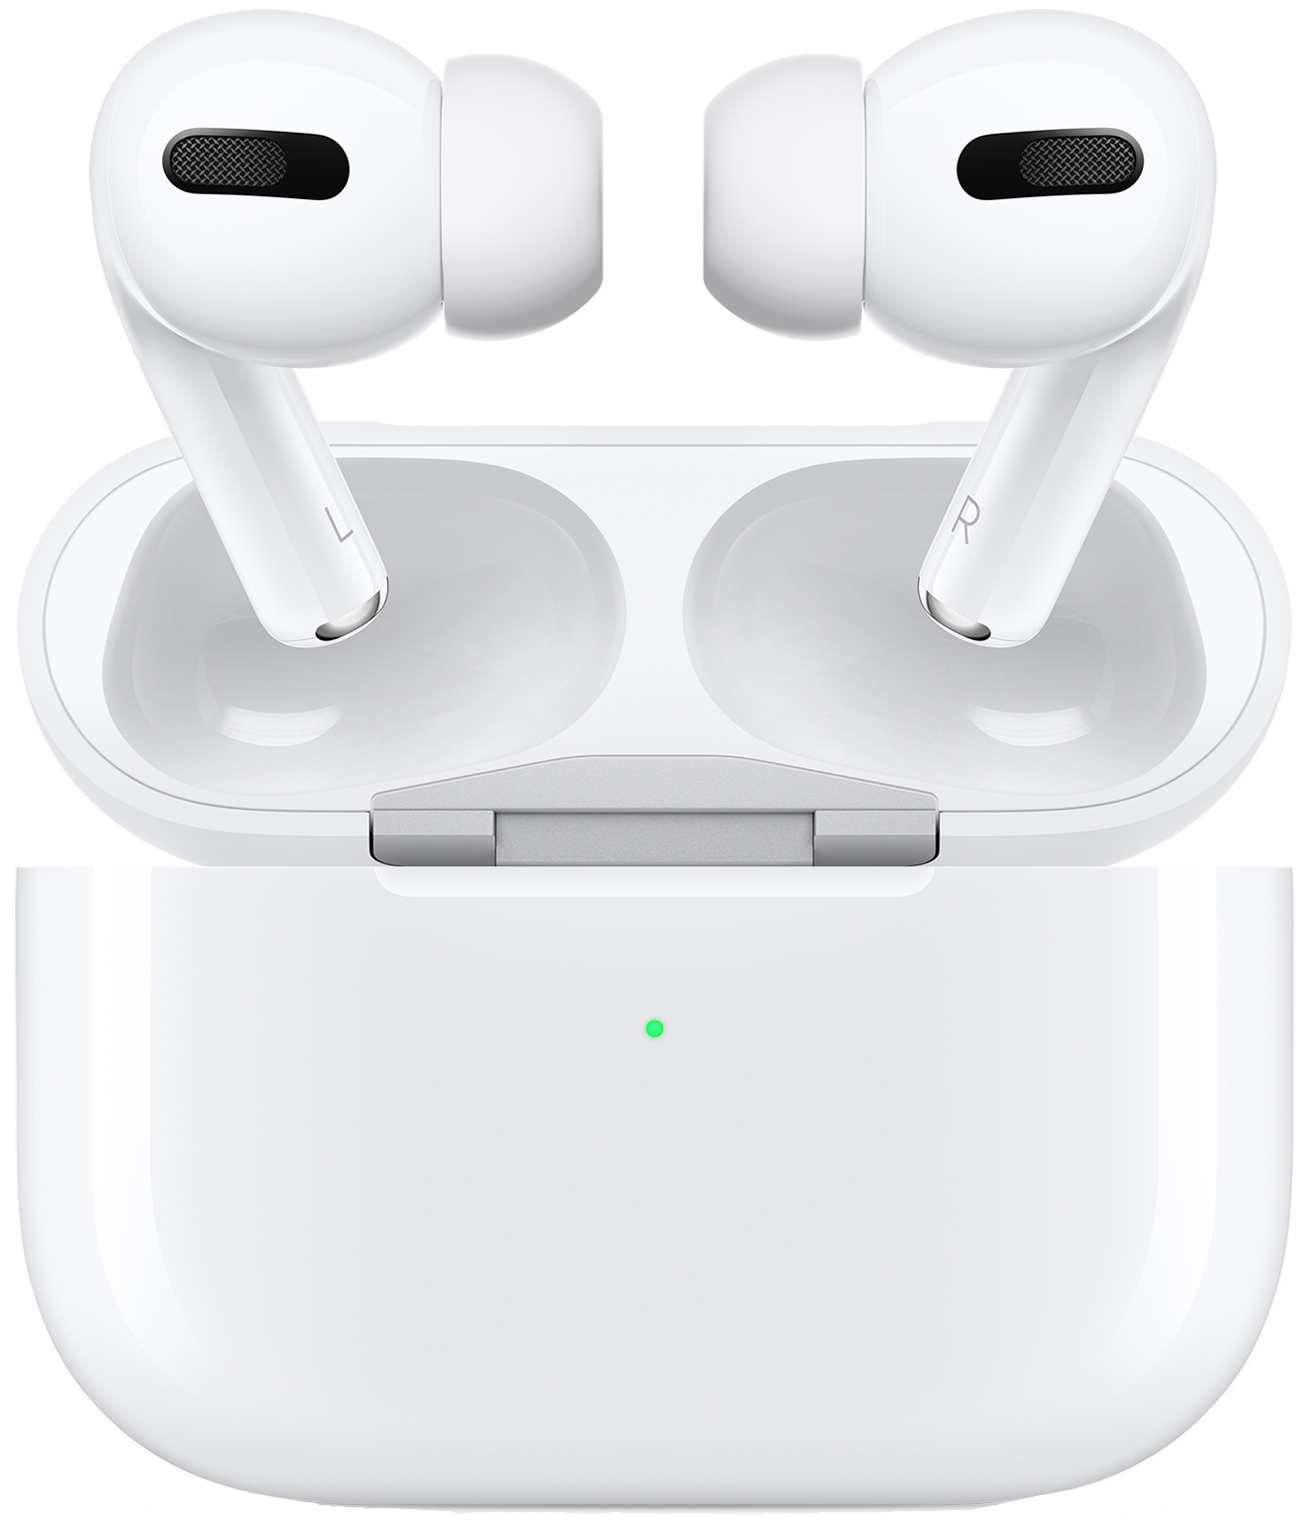 White Airpods PNG Transparent Image